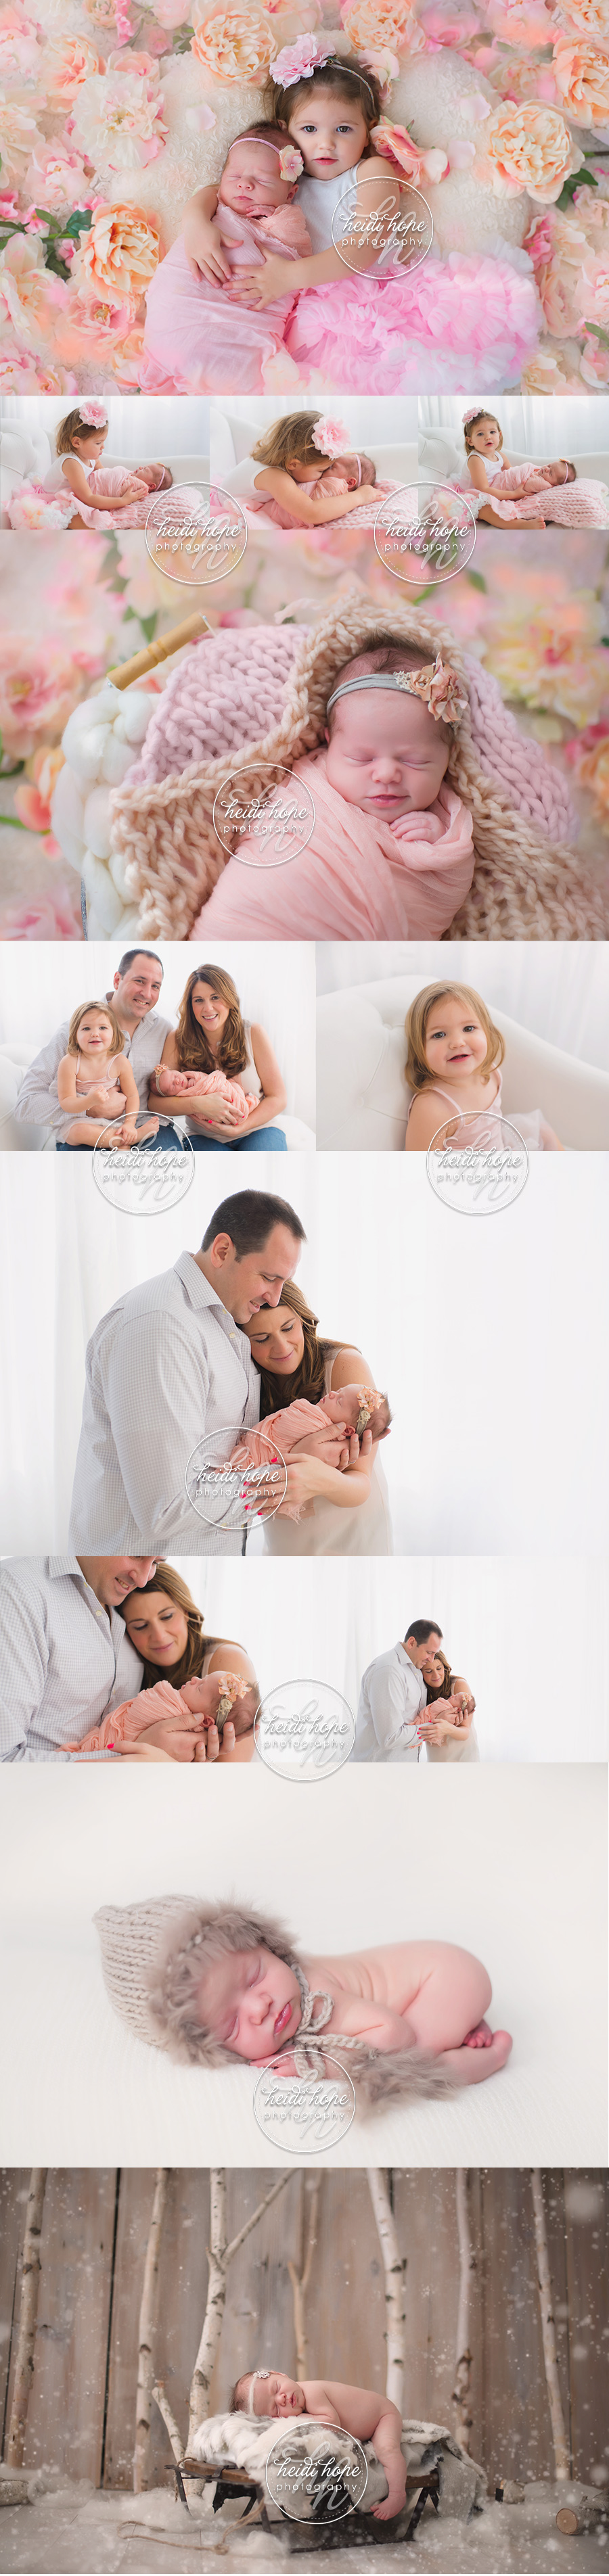 winter-newborn-girl-session-with-big-sister-flowers-and-snow